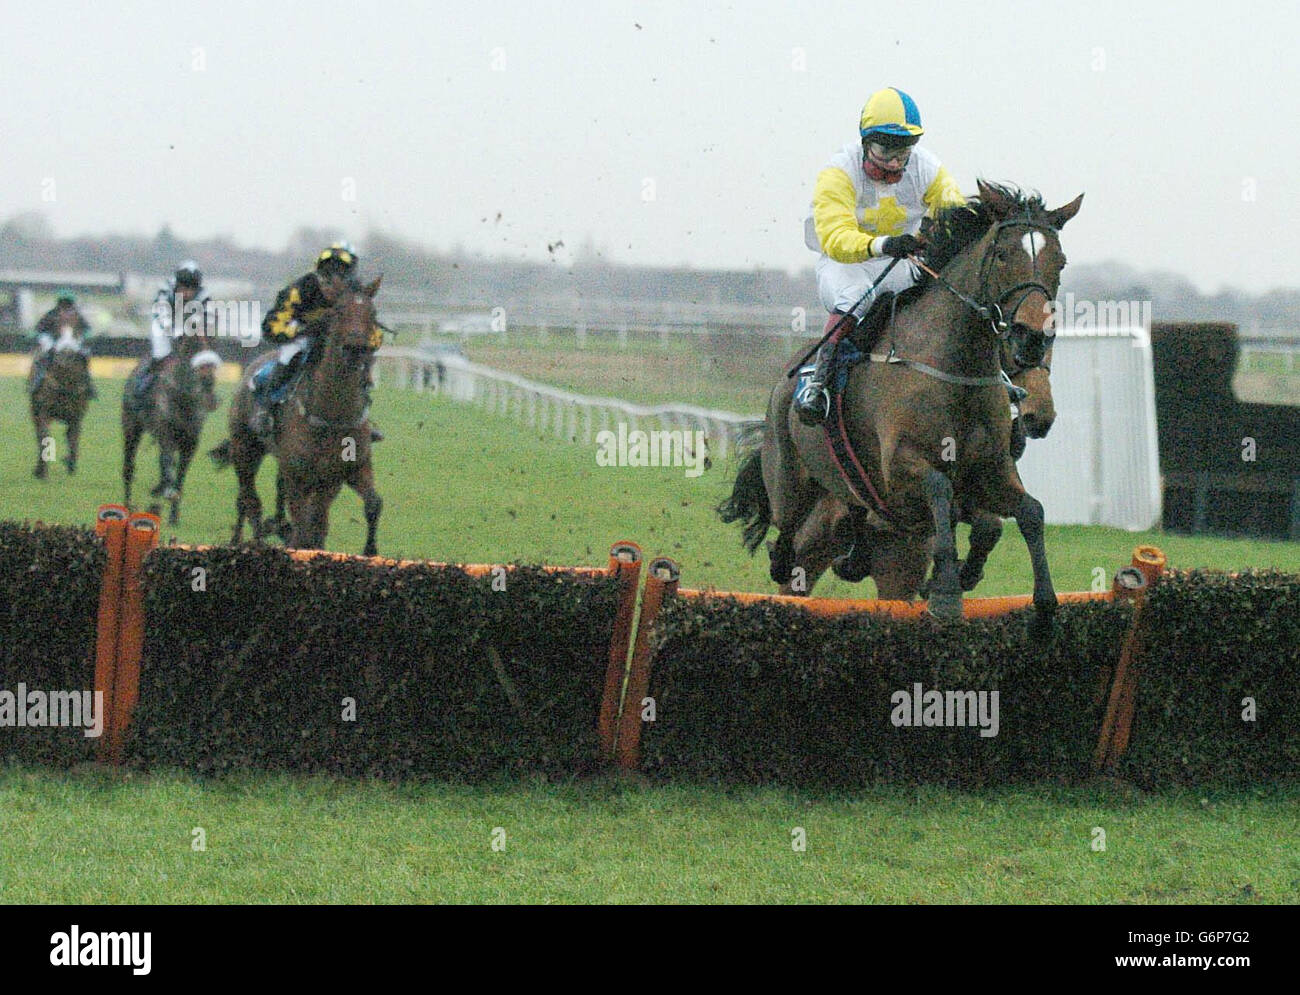 Karyon and F. Keniry (right) jump the last hurdle on their way to victory in the Bradford Juvenile Selling Hurdle at Catterick Races, Thursday 15th January. PA Photo: John Giles Stock Photo